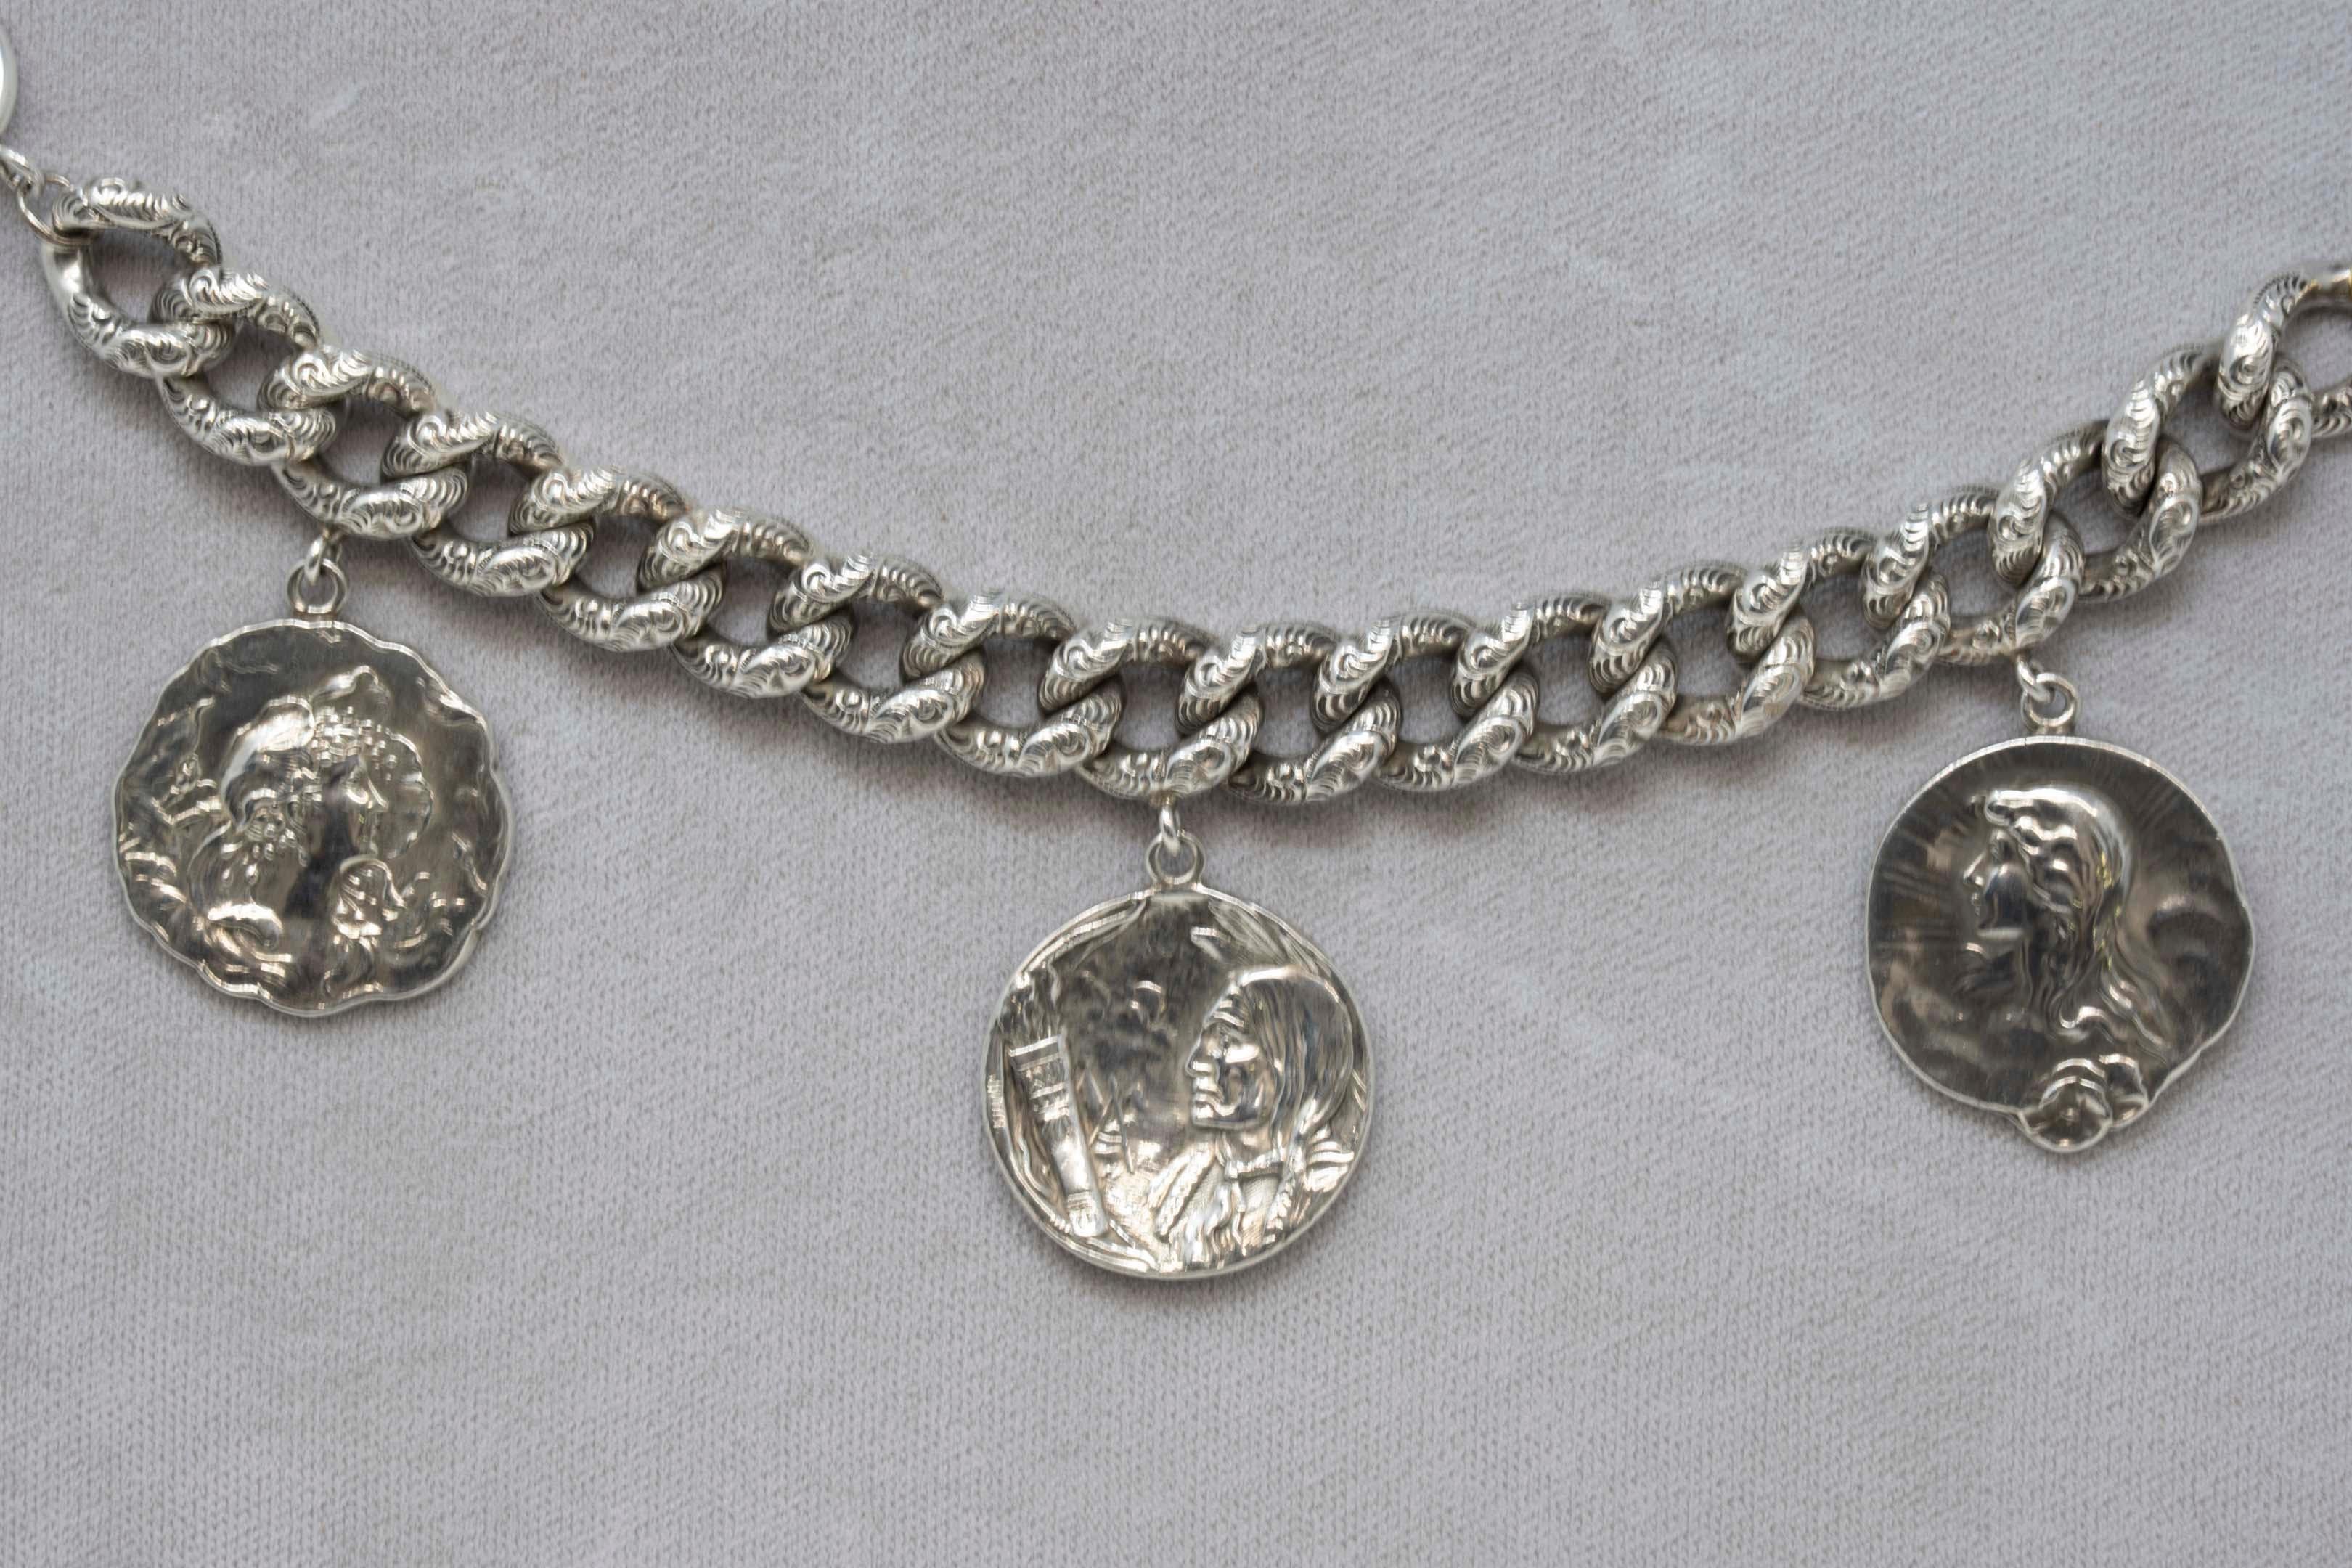 Sterling silver link bracelet with medal charms showing two Victorian ladies and a native American. Stamped on the back with the hallmark of Unger Bros Actif from 1874-1914, Newark NJ. Bracelet measures 8 inches long x 1/2 inches wide. Each medal